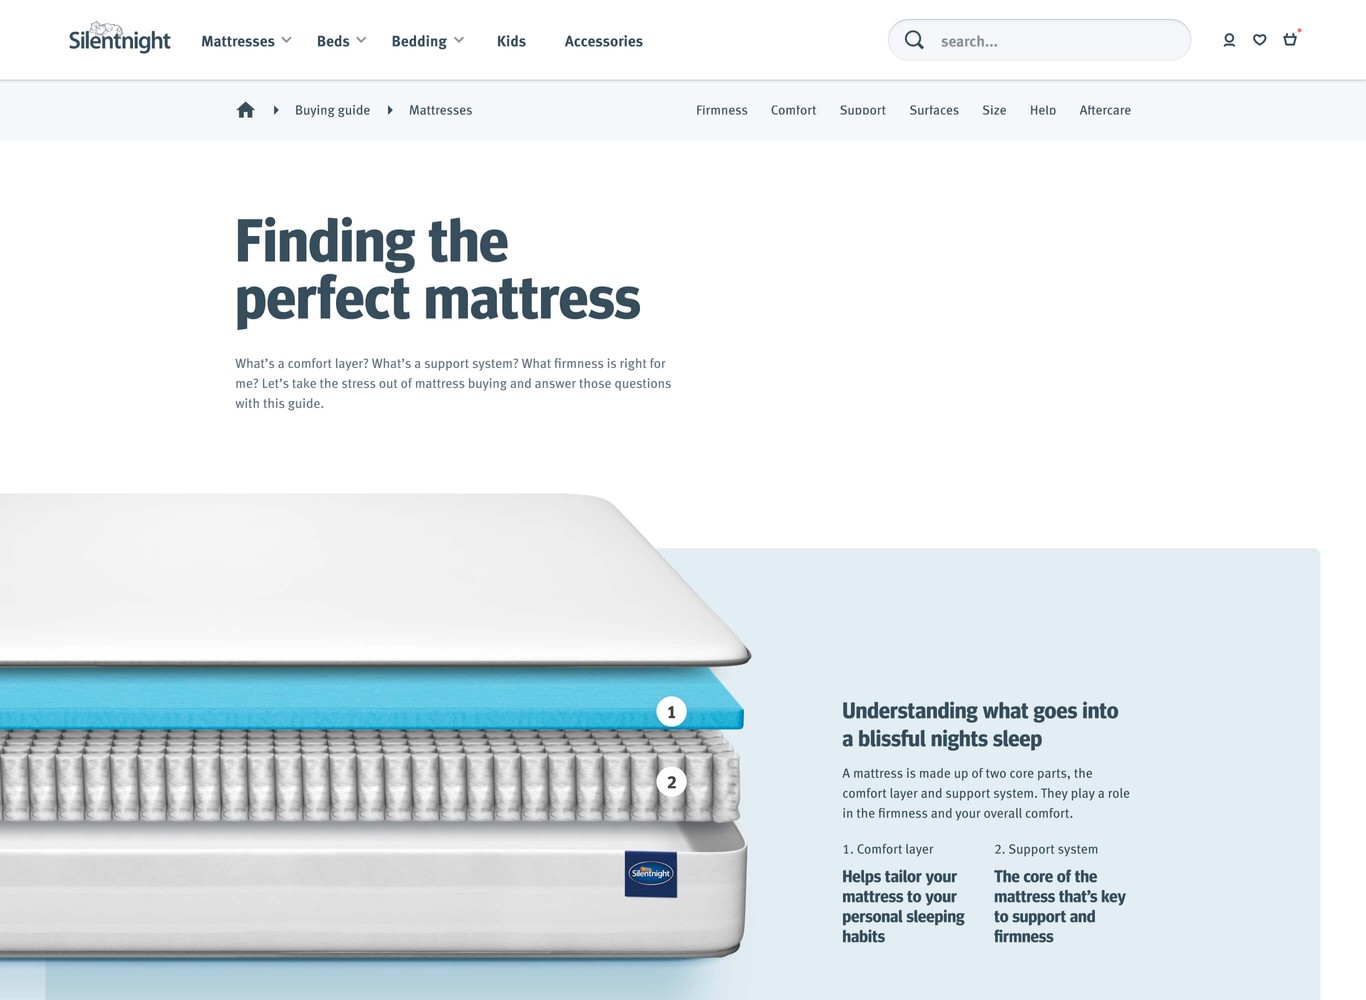 The desktop version of the introduction for the mattresses buying guide.